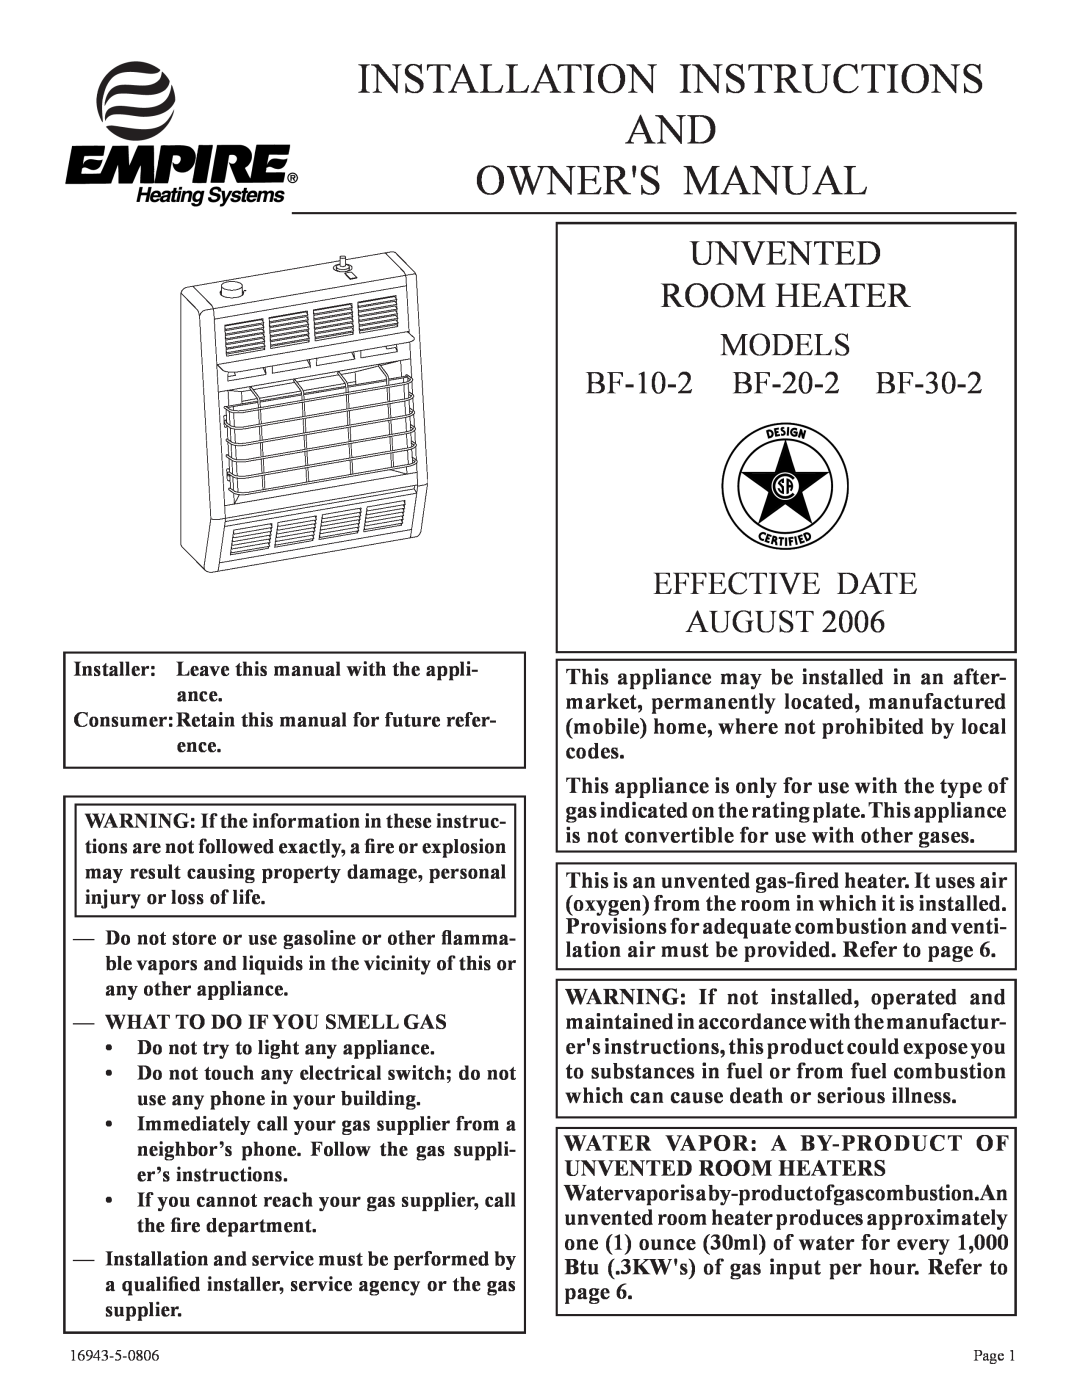 Empire Comfort Systems installation instructions MODELS BF-10-2 BF-20-2 BF-30-2, Unvented Room Heater 